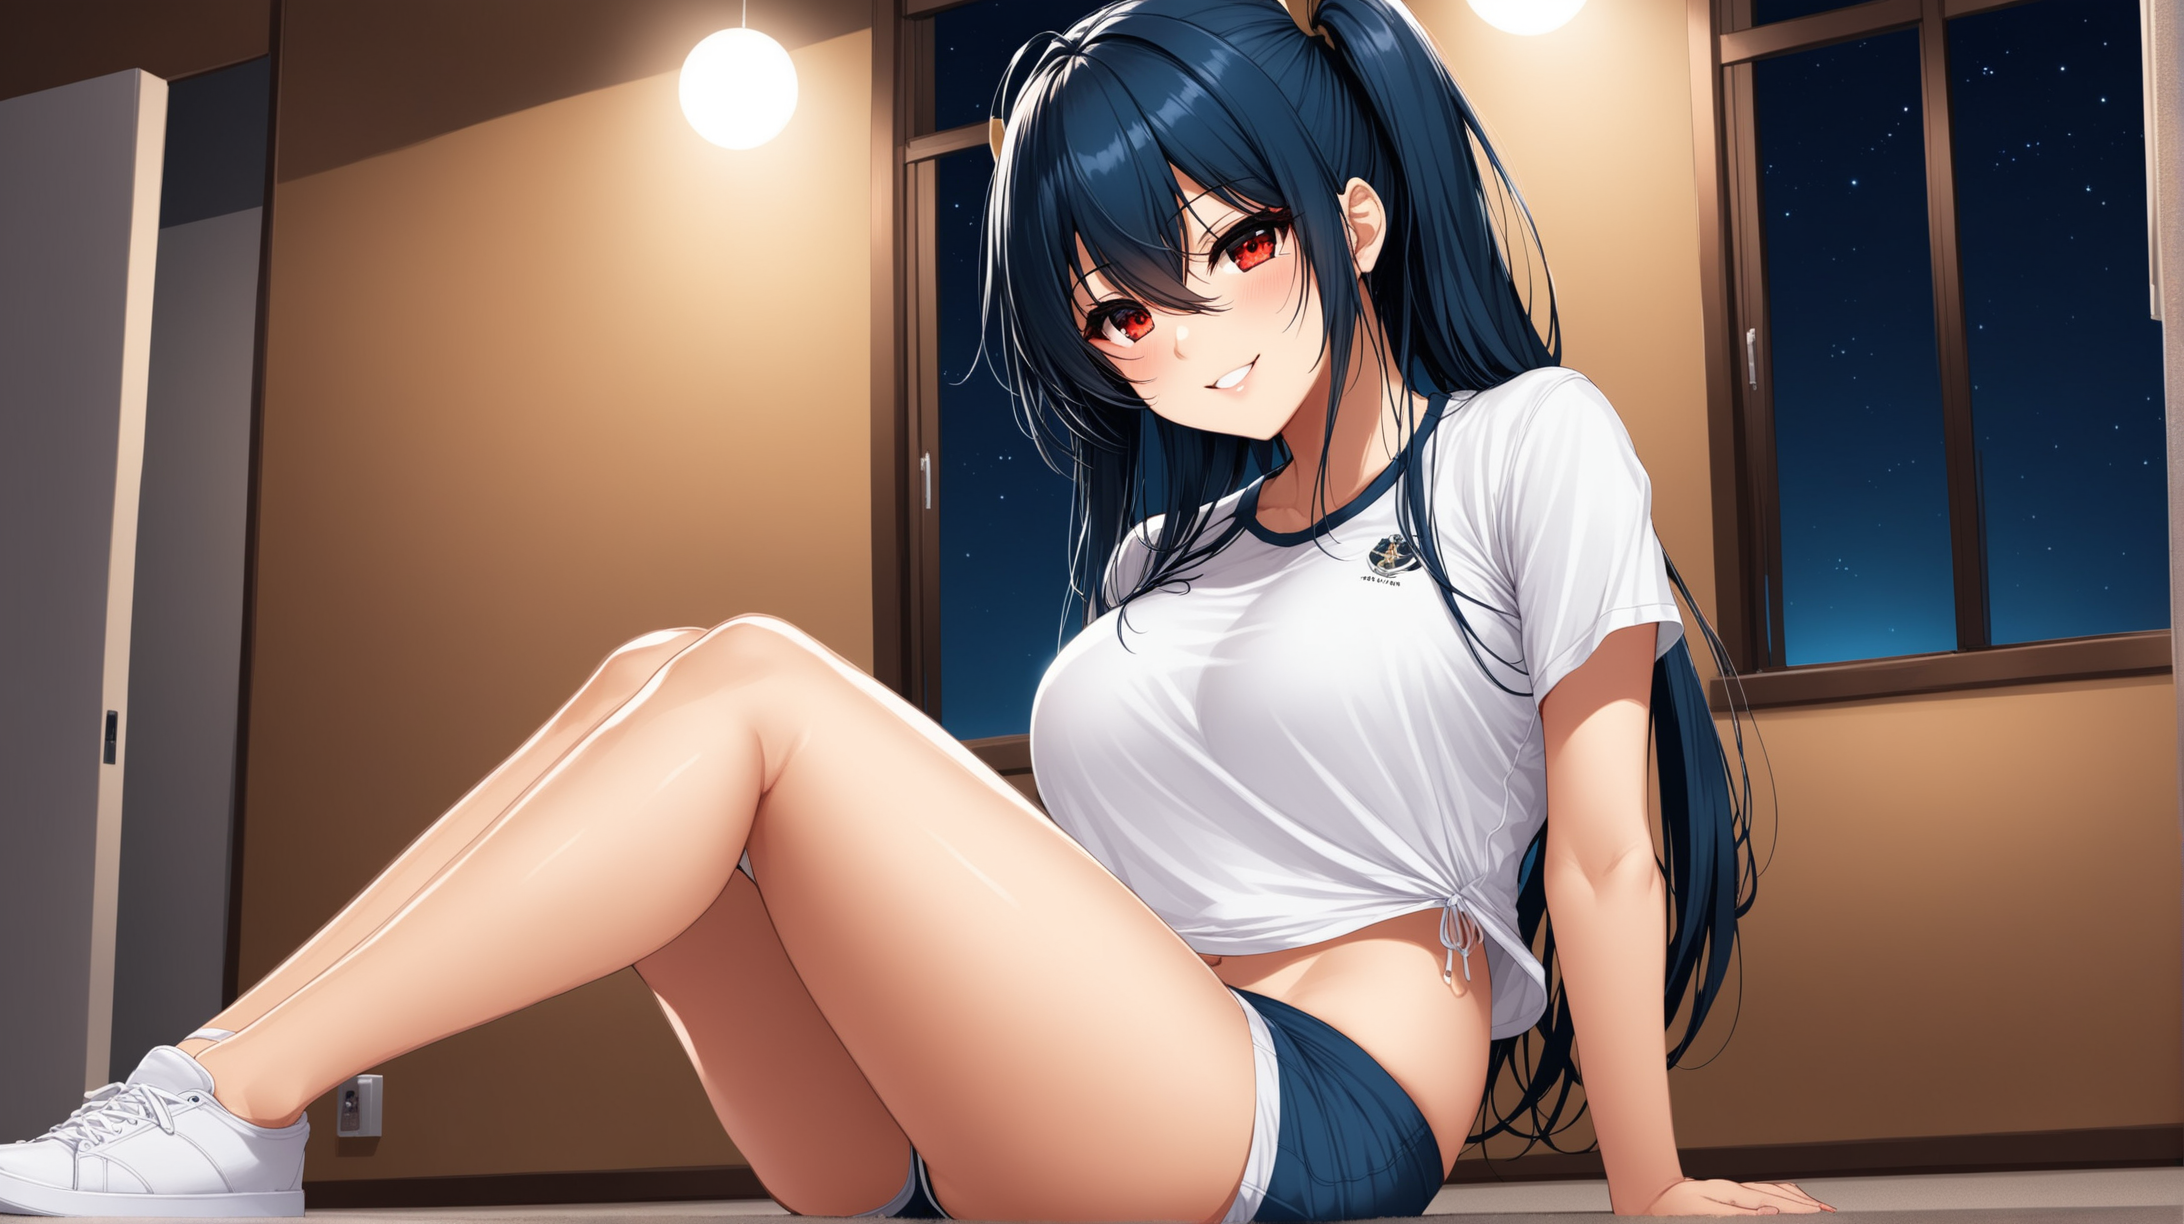 Draw the character Taihou from Azur Lane, long hair, red eyes, high quality, indoors, at night, sitting, low angle, wearing gym shorts and a t-shirt, smiling at the viewer